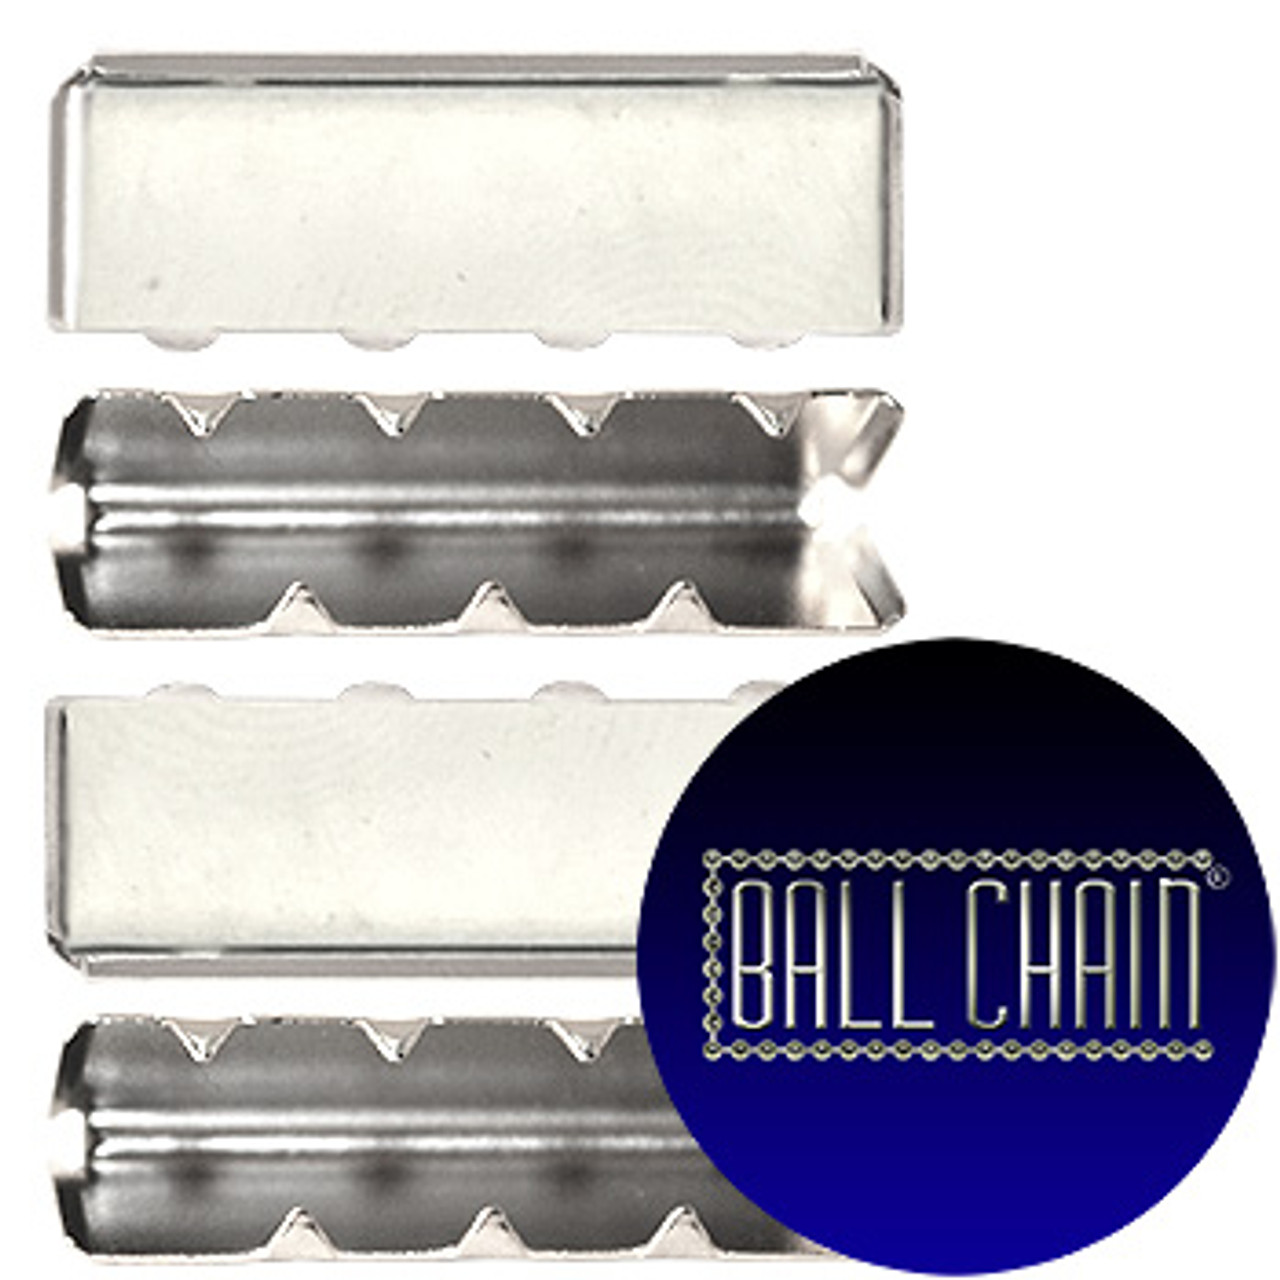 Nickel Plated Metal Clamps - 26 mm Length (BCM43)